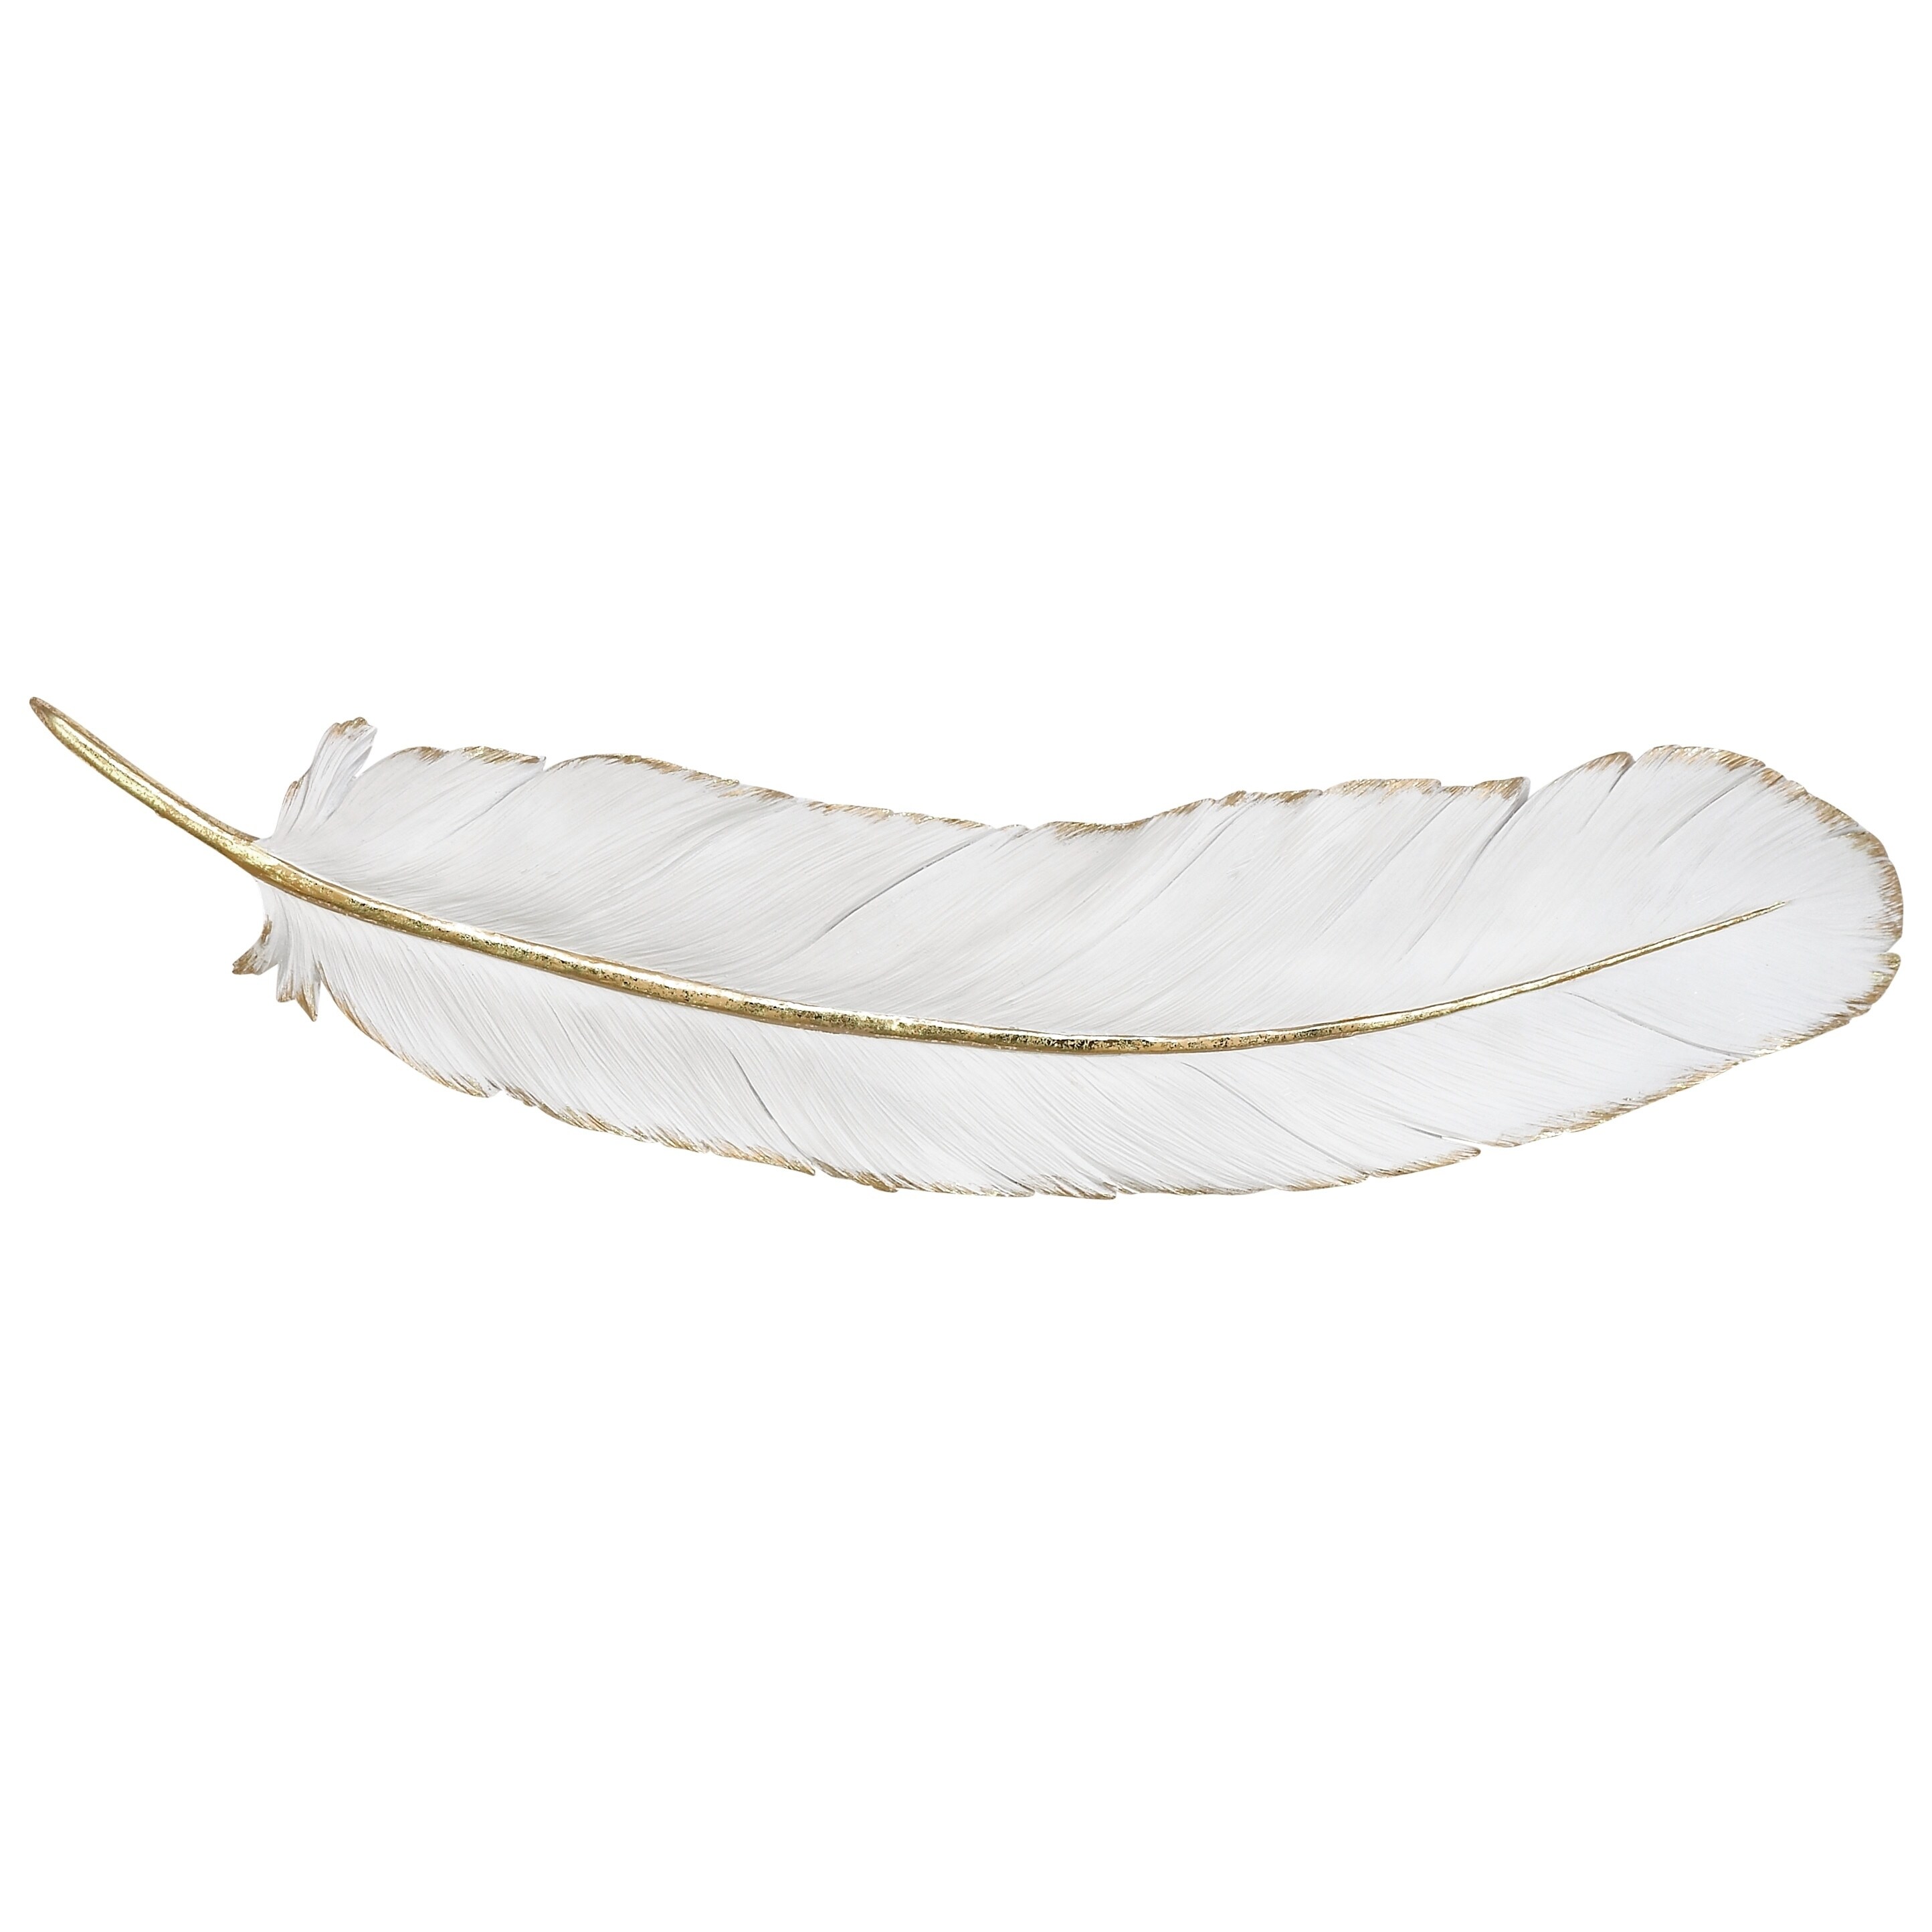 Extra Large White Feather Wall Decor With Metallic Gold Trim 31 X 7 31 W 7 On Sale Overstock 22801604